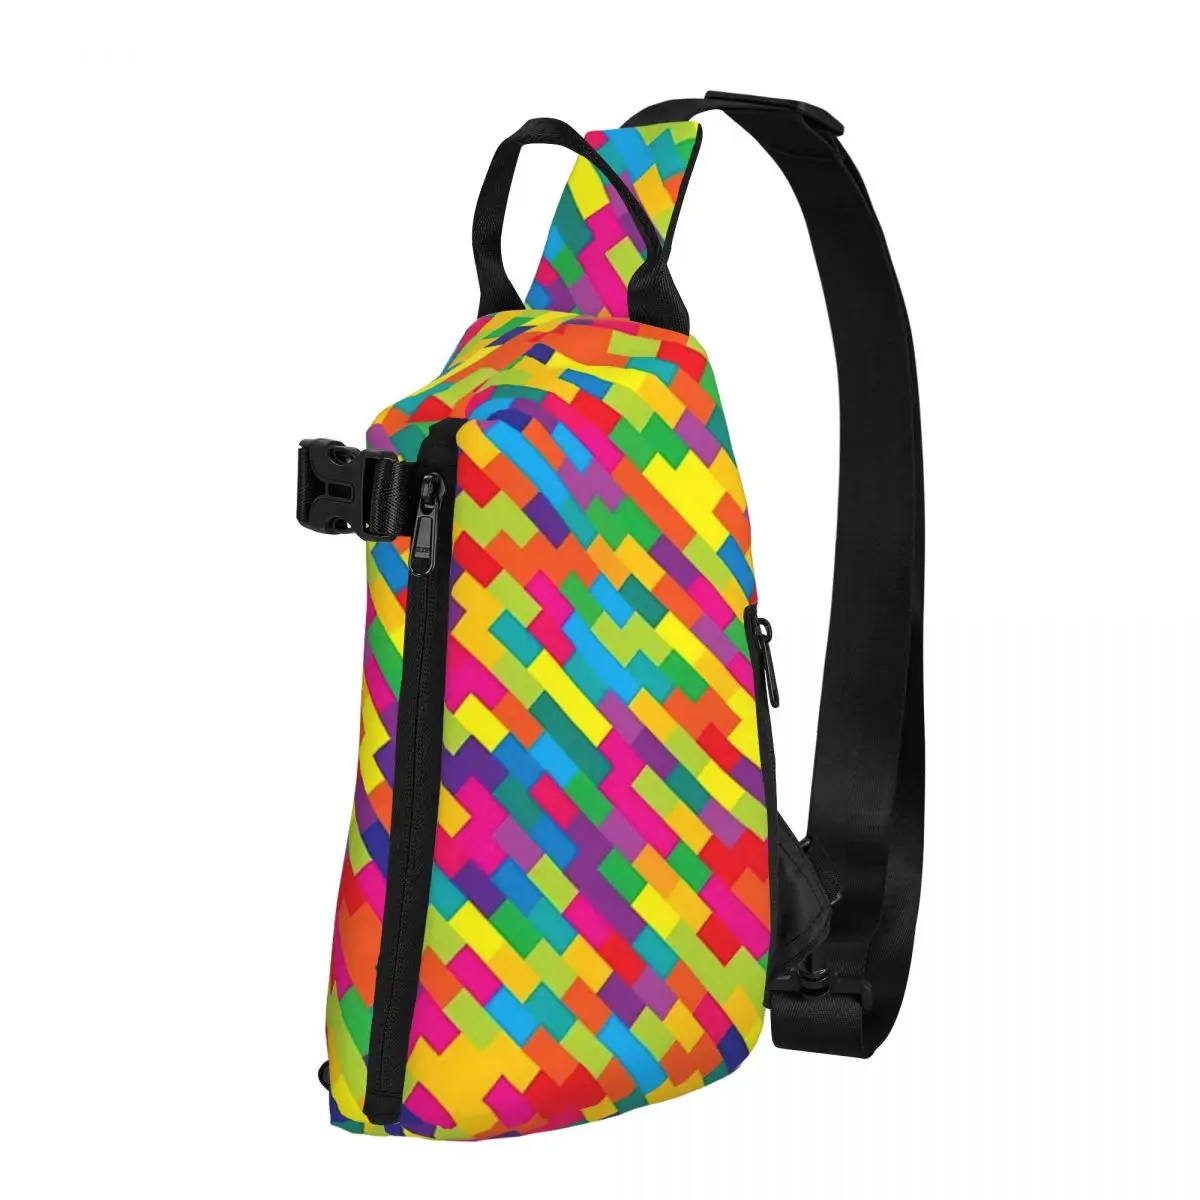 Abstract Colorful Geometric Grid Multicolored Shapes Shoulder Bags Chest Cross Chest Bag Diagonally Casual Messenger Bag